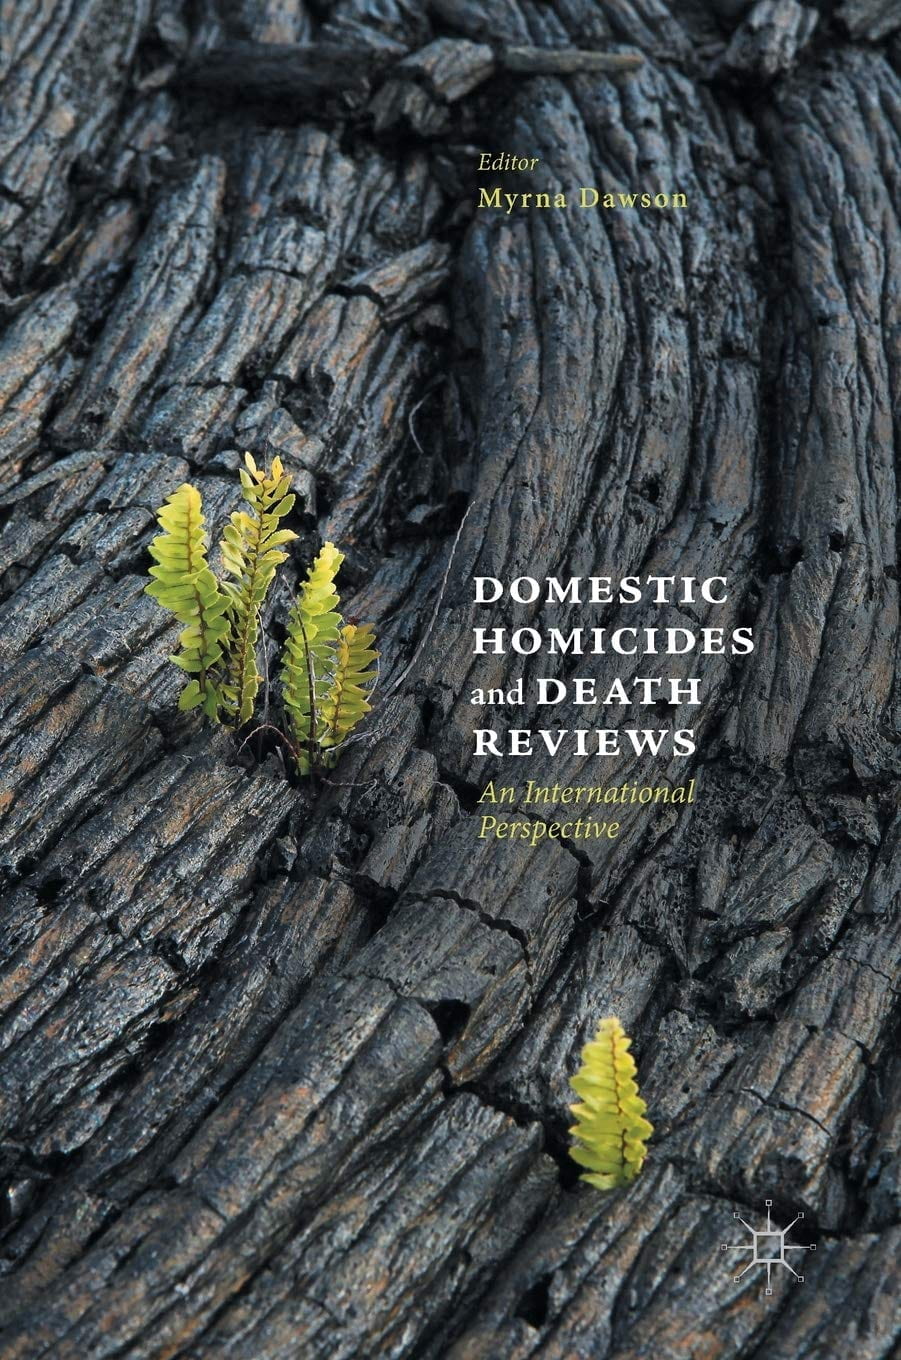 Domestic Homicides and Death Reviews Book Cover.